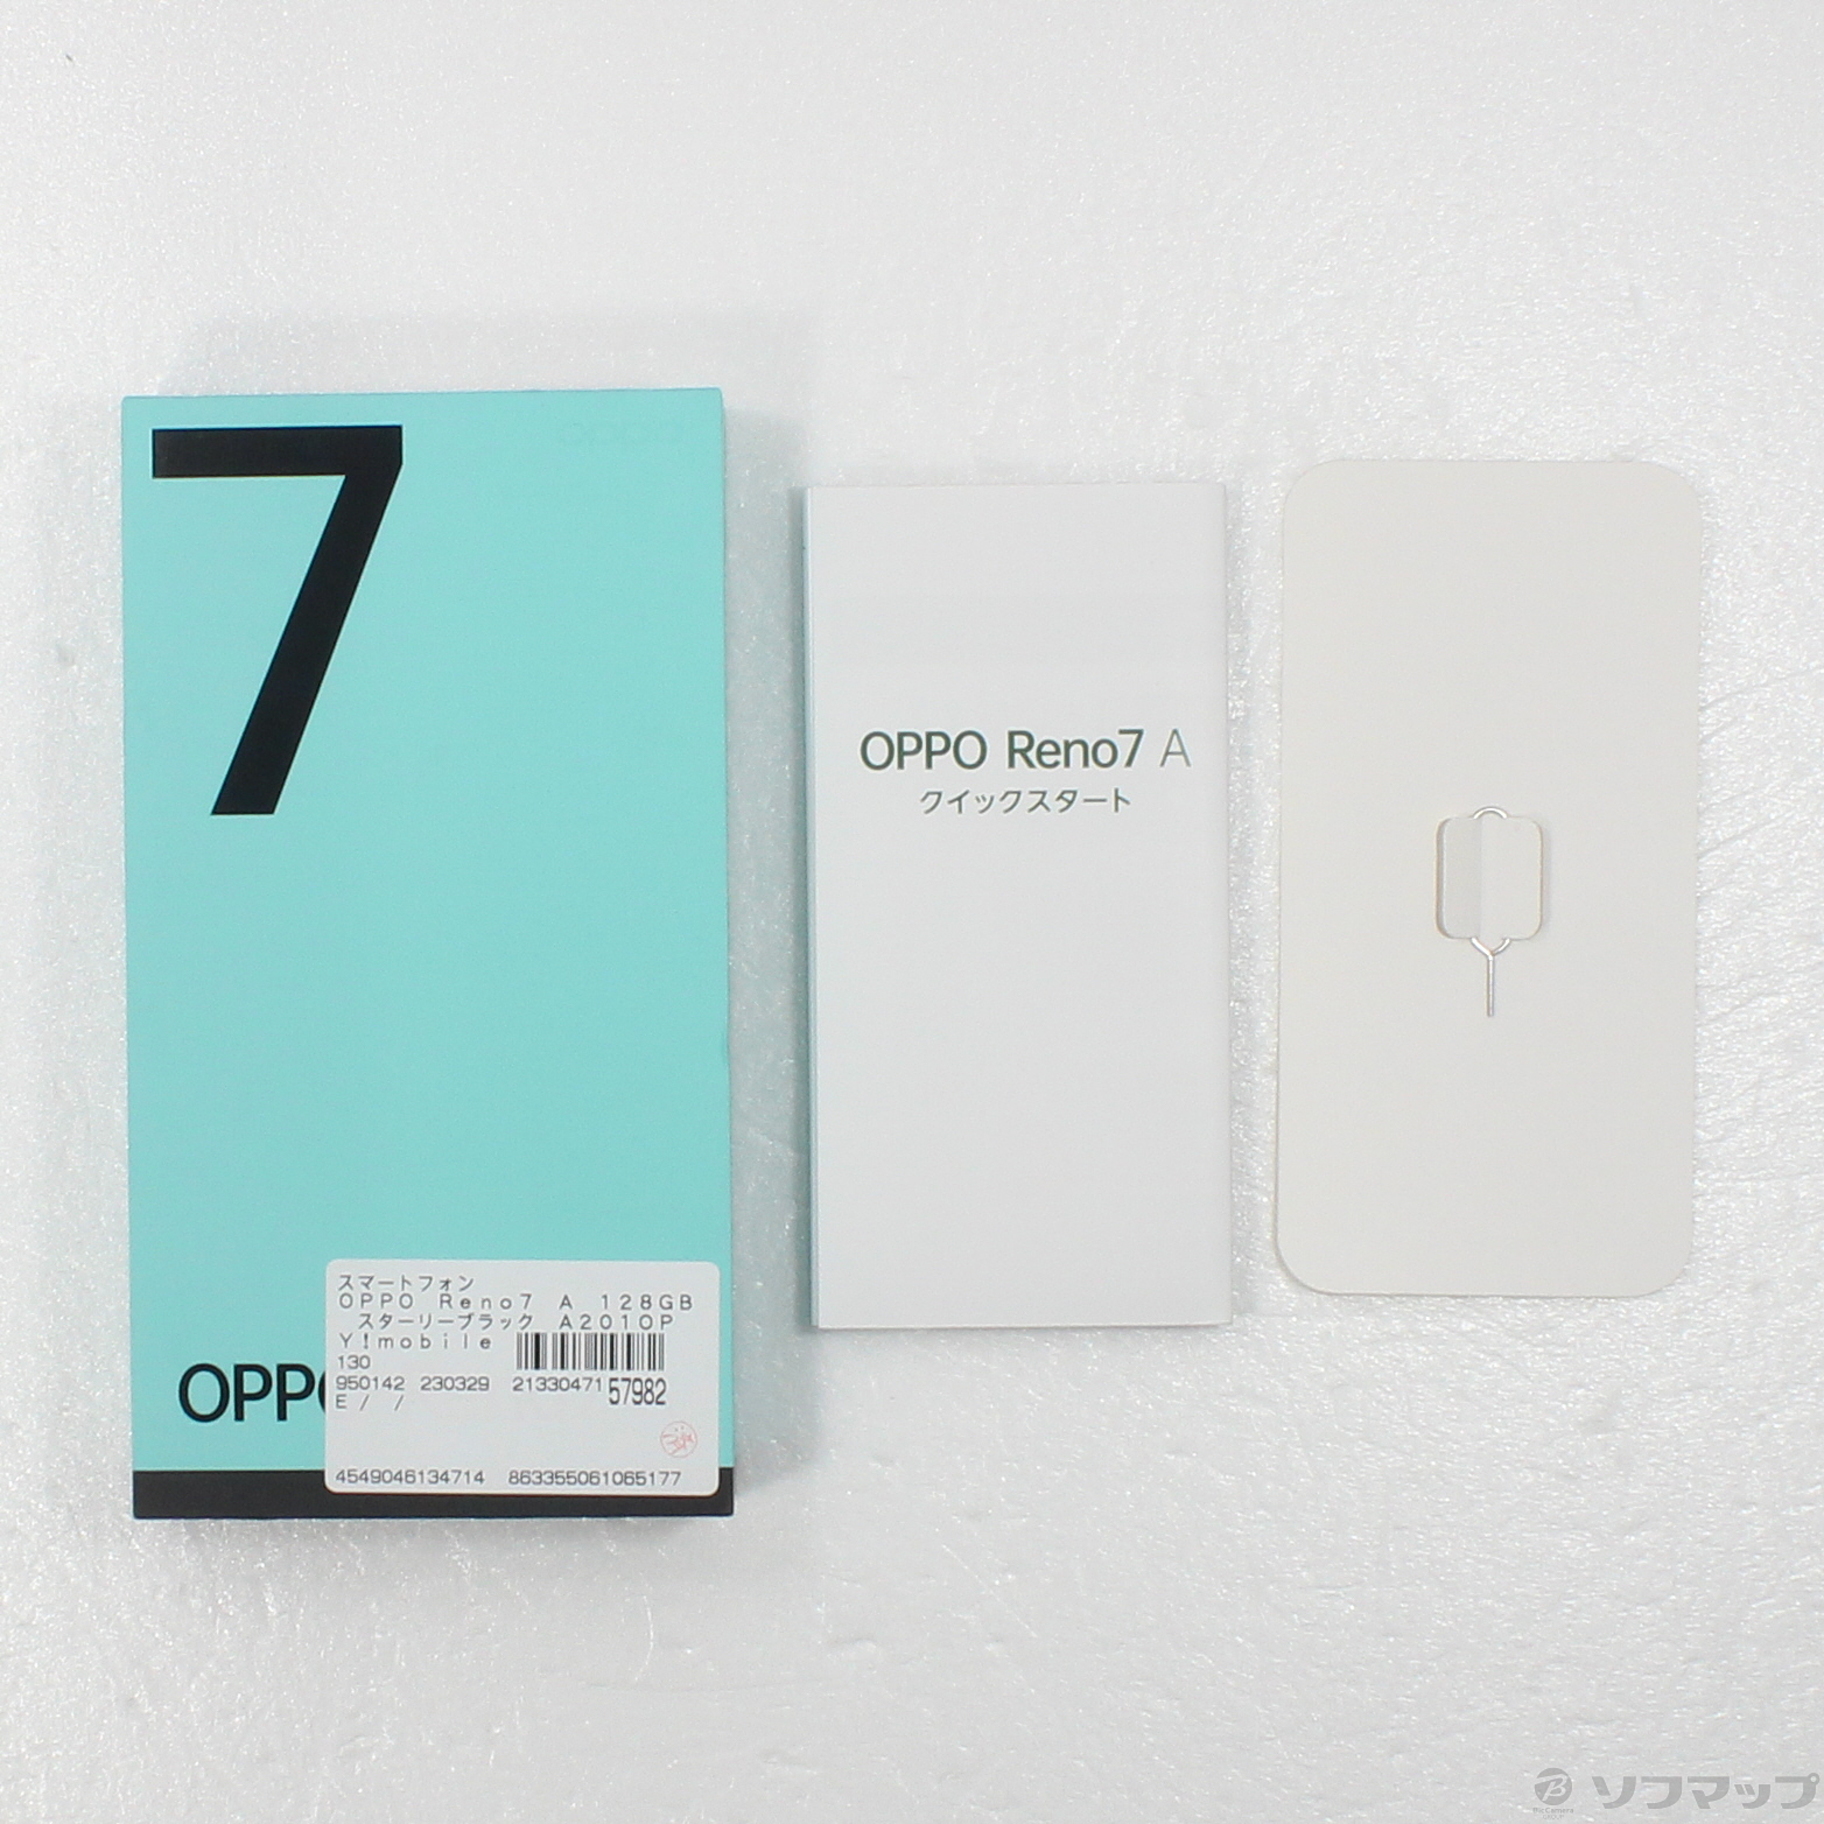 OPPO Reno7 A A2010P Y!mobile スターリーブラック